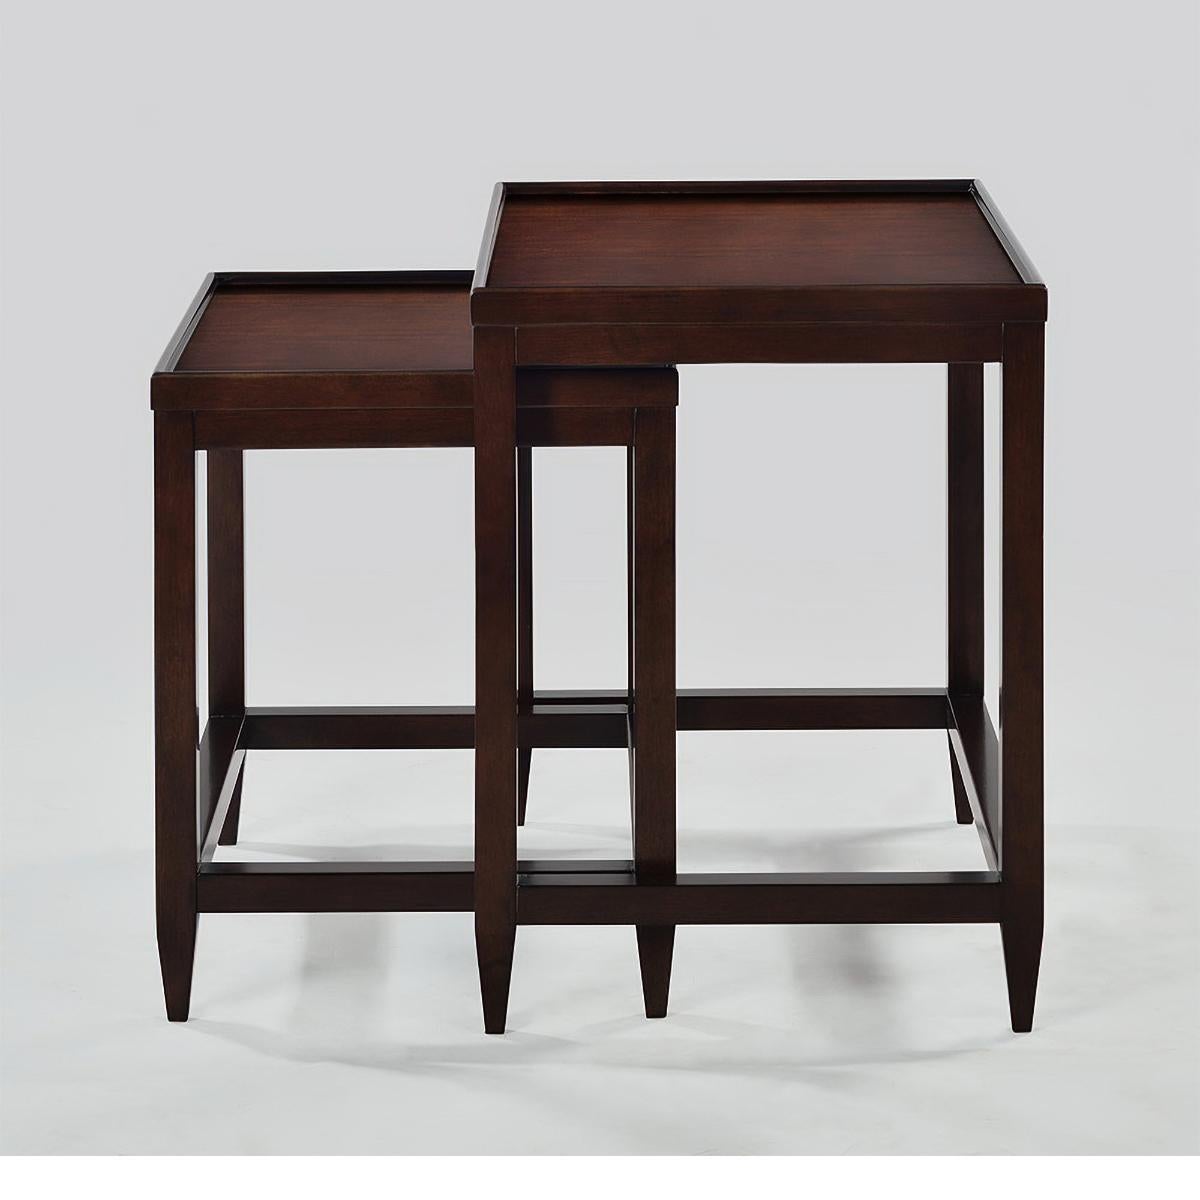 A Classic nest of tables, two rectangular nested side tables with a “rustic” dark brown mahogany finish with a hand-rubbed finish.

Dimensions: 24